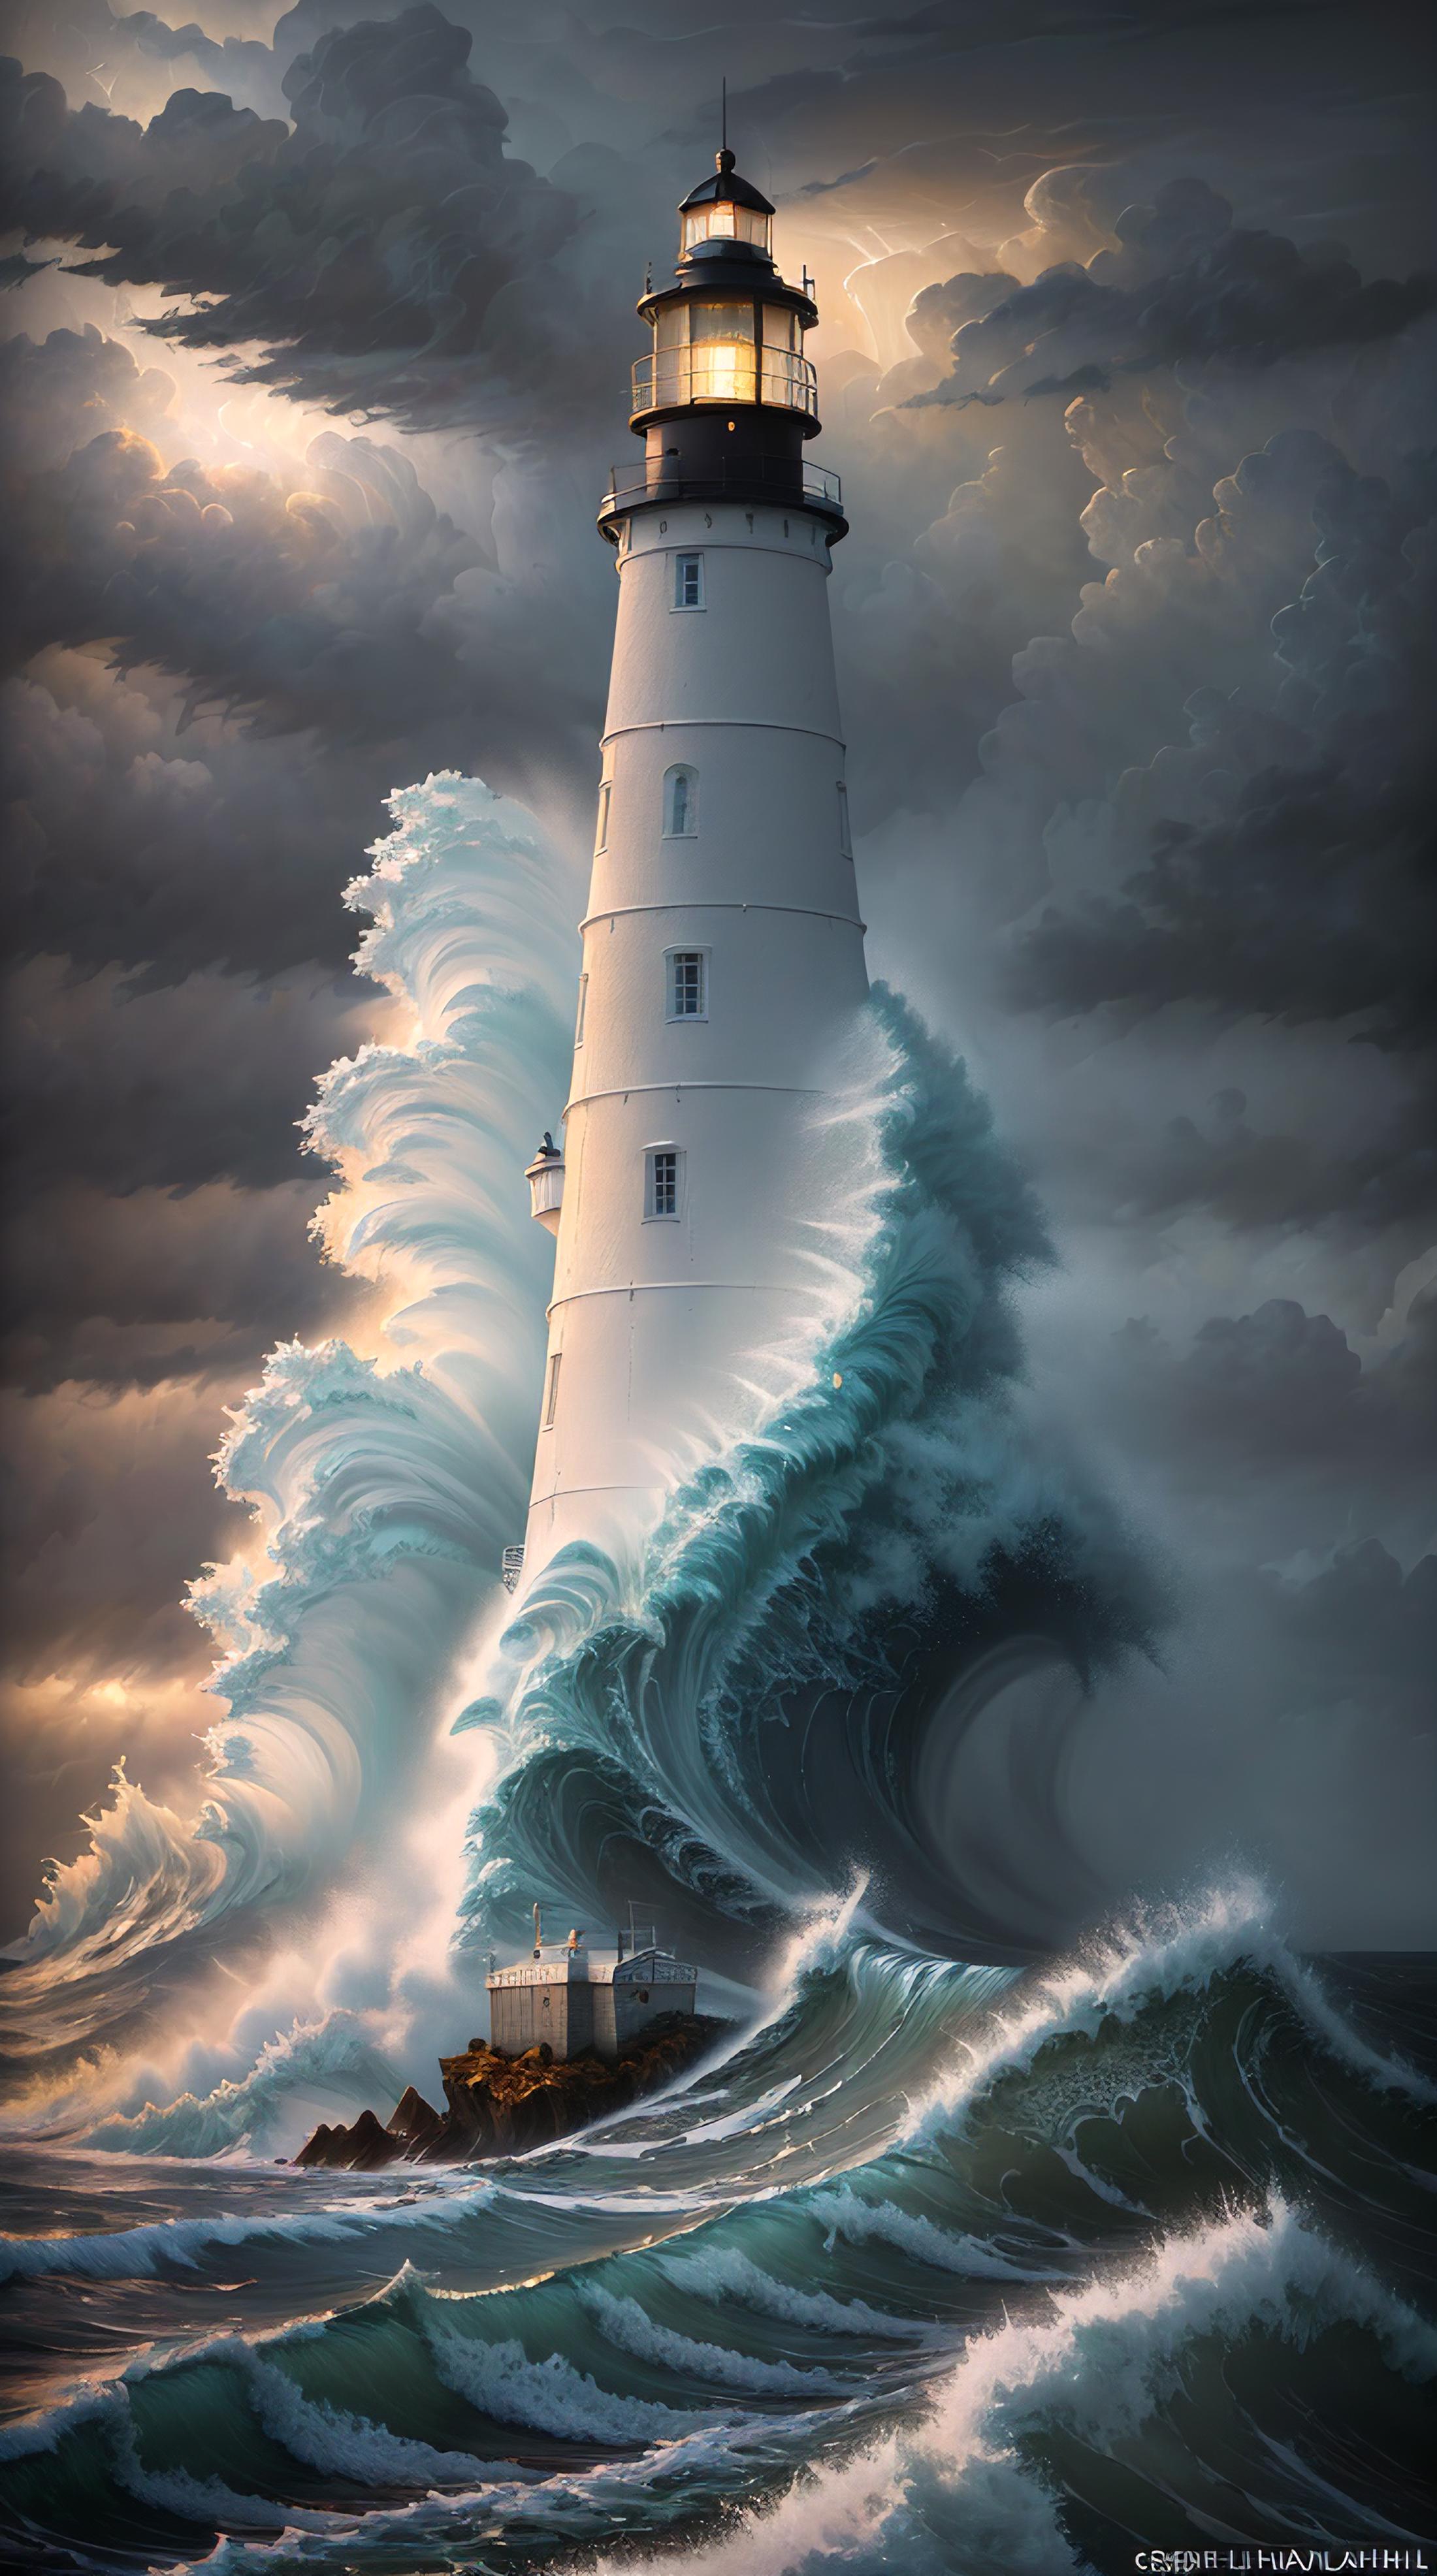 A painting of a tower surrounded by a huge wave.